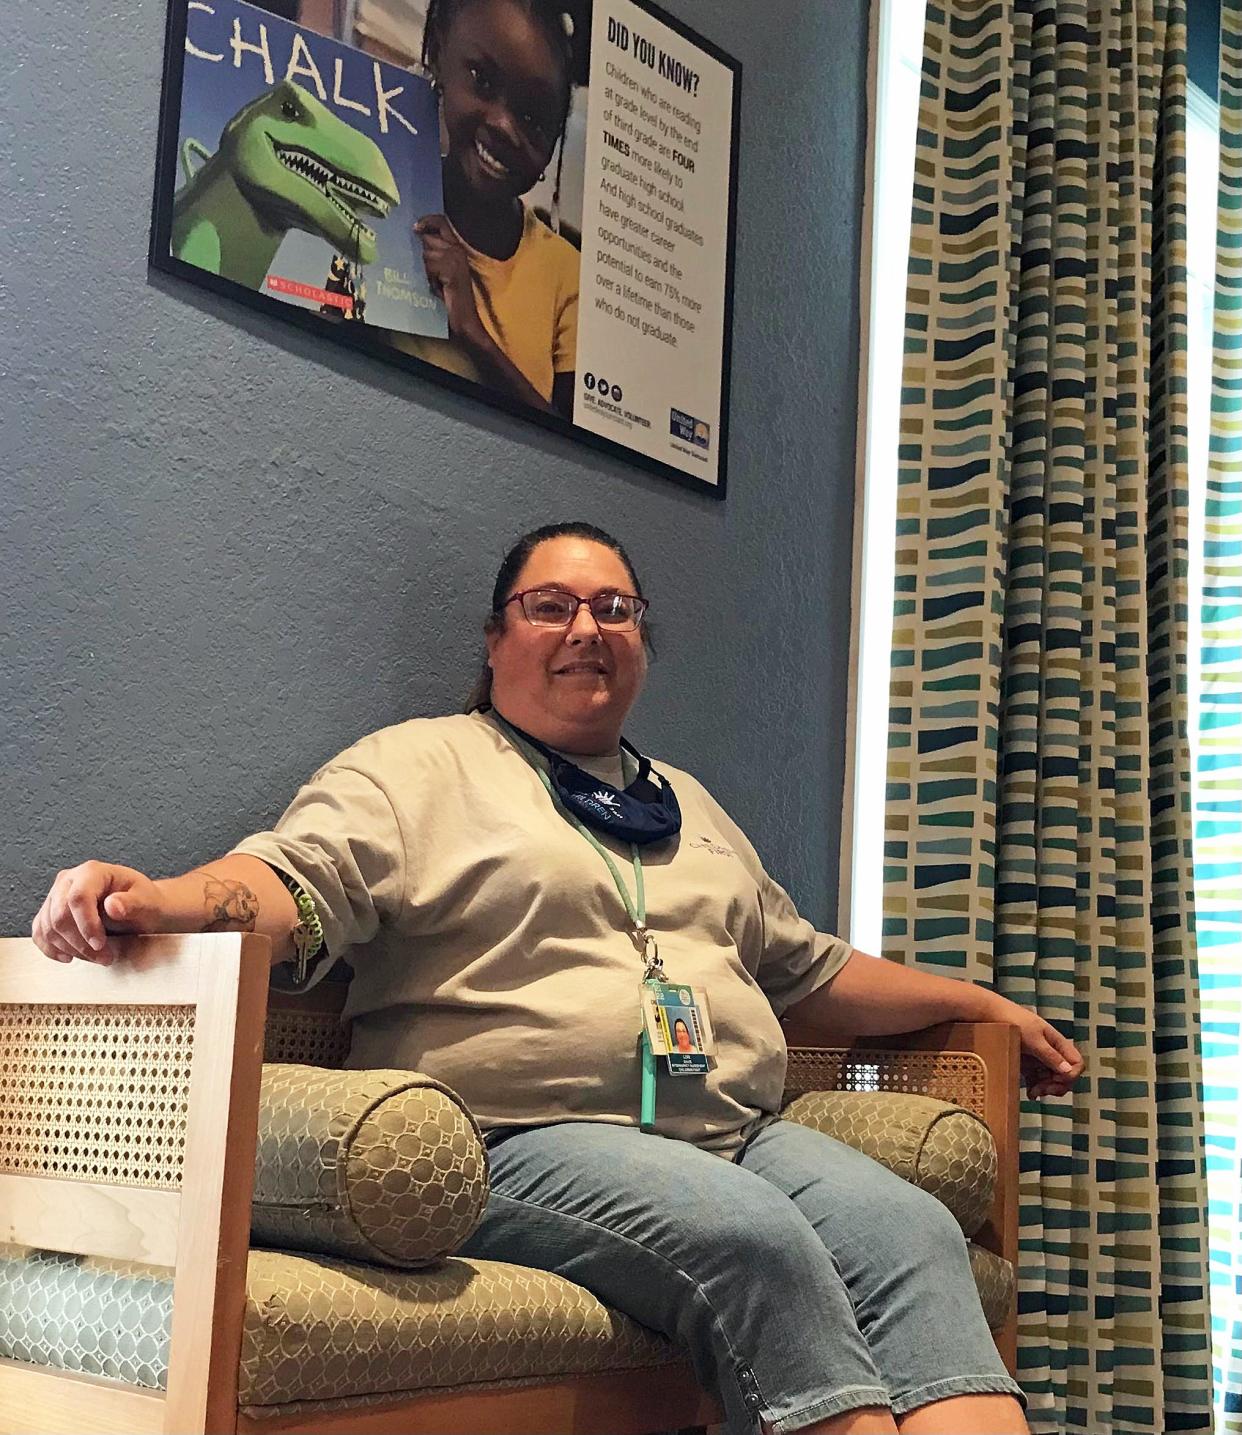 Lori Davis, 42, of South Venice, sits in the Newtown center where she works as a family advocate social worker. Long accustomed to helping others and referring some to Season of Sharing, she and her family recently hit hard times, and it was their turn to ask for assistance.